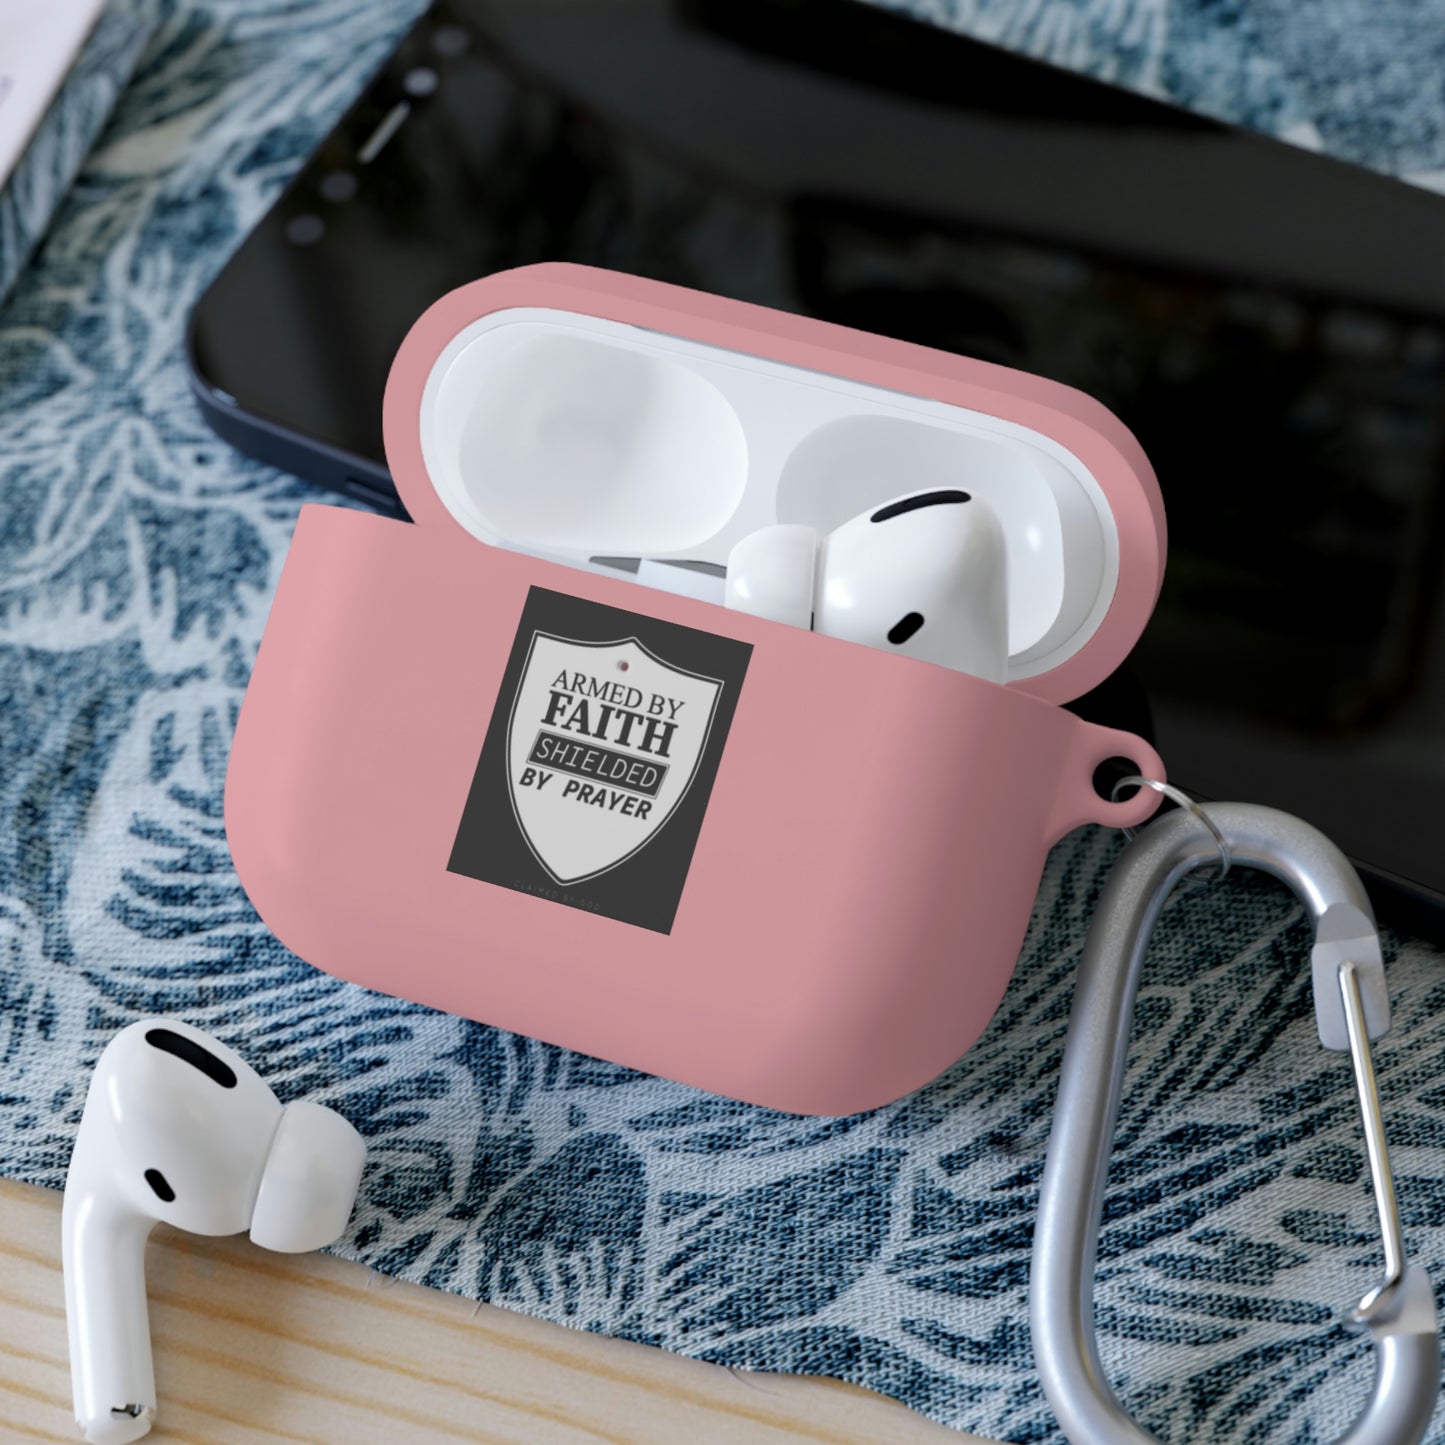 Armed by Faith Shielded By Prayer AirPods / Airpods Pro Case cover